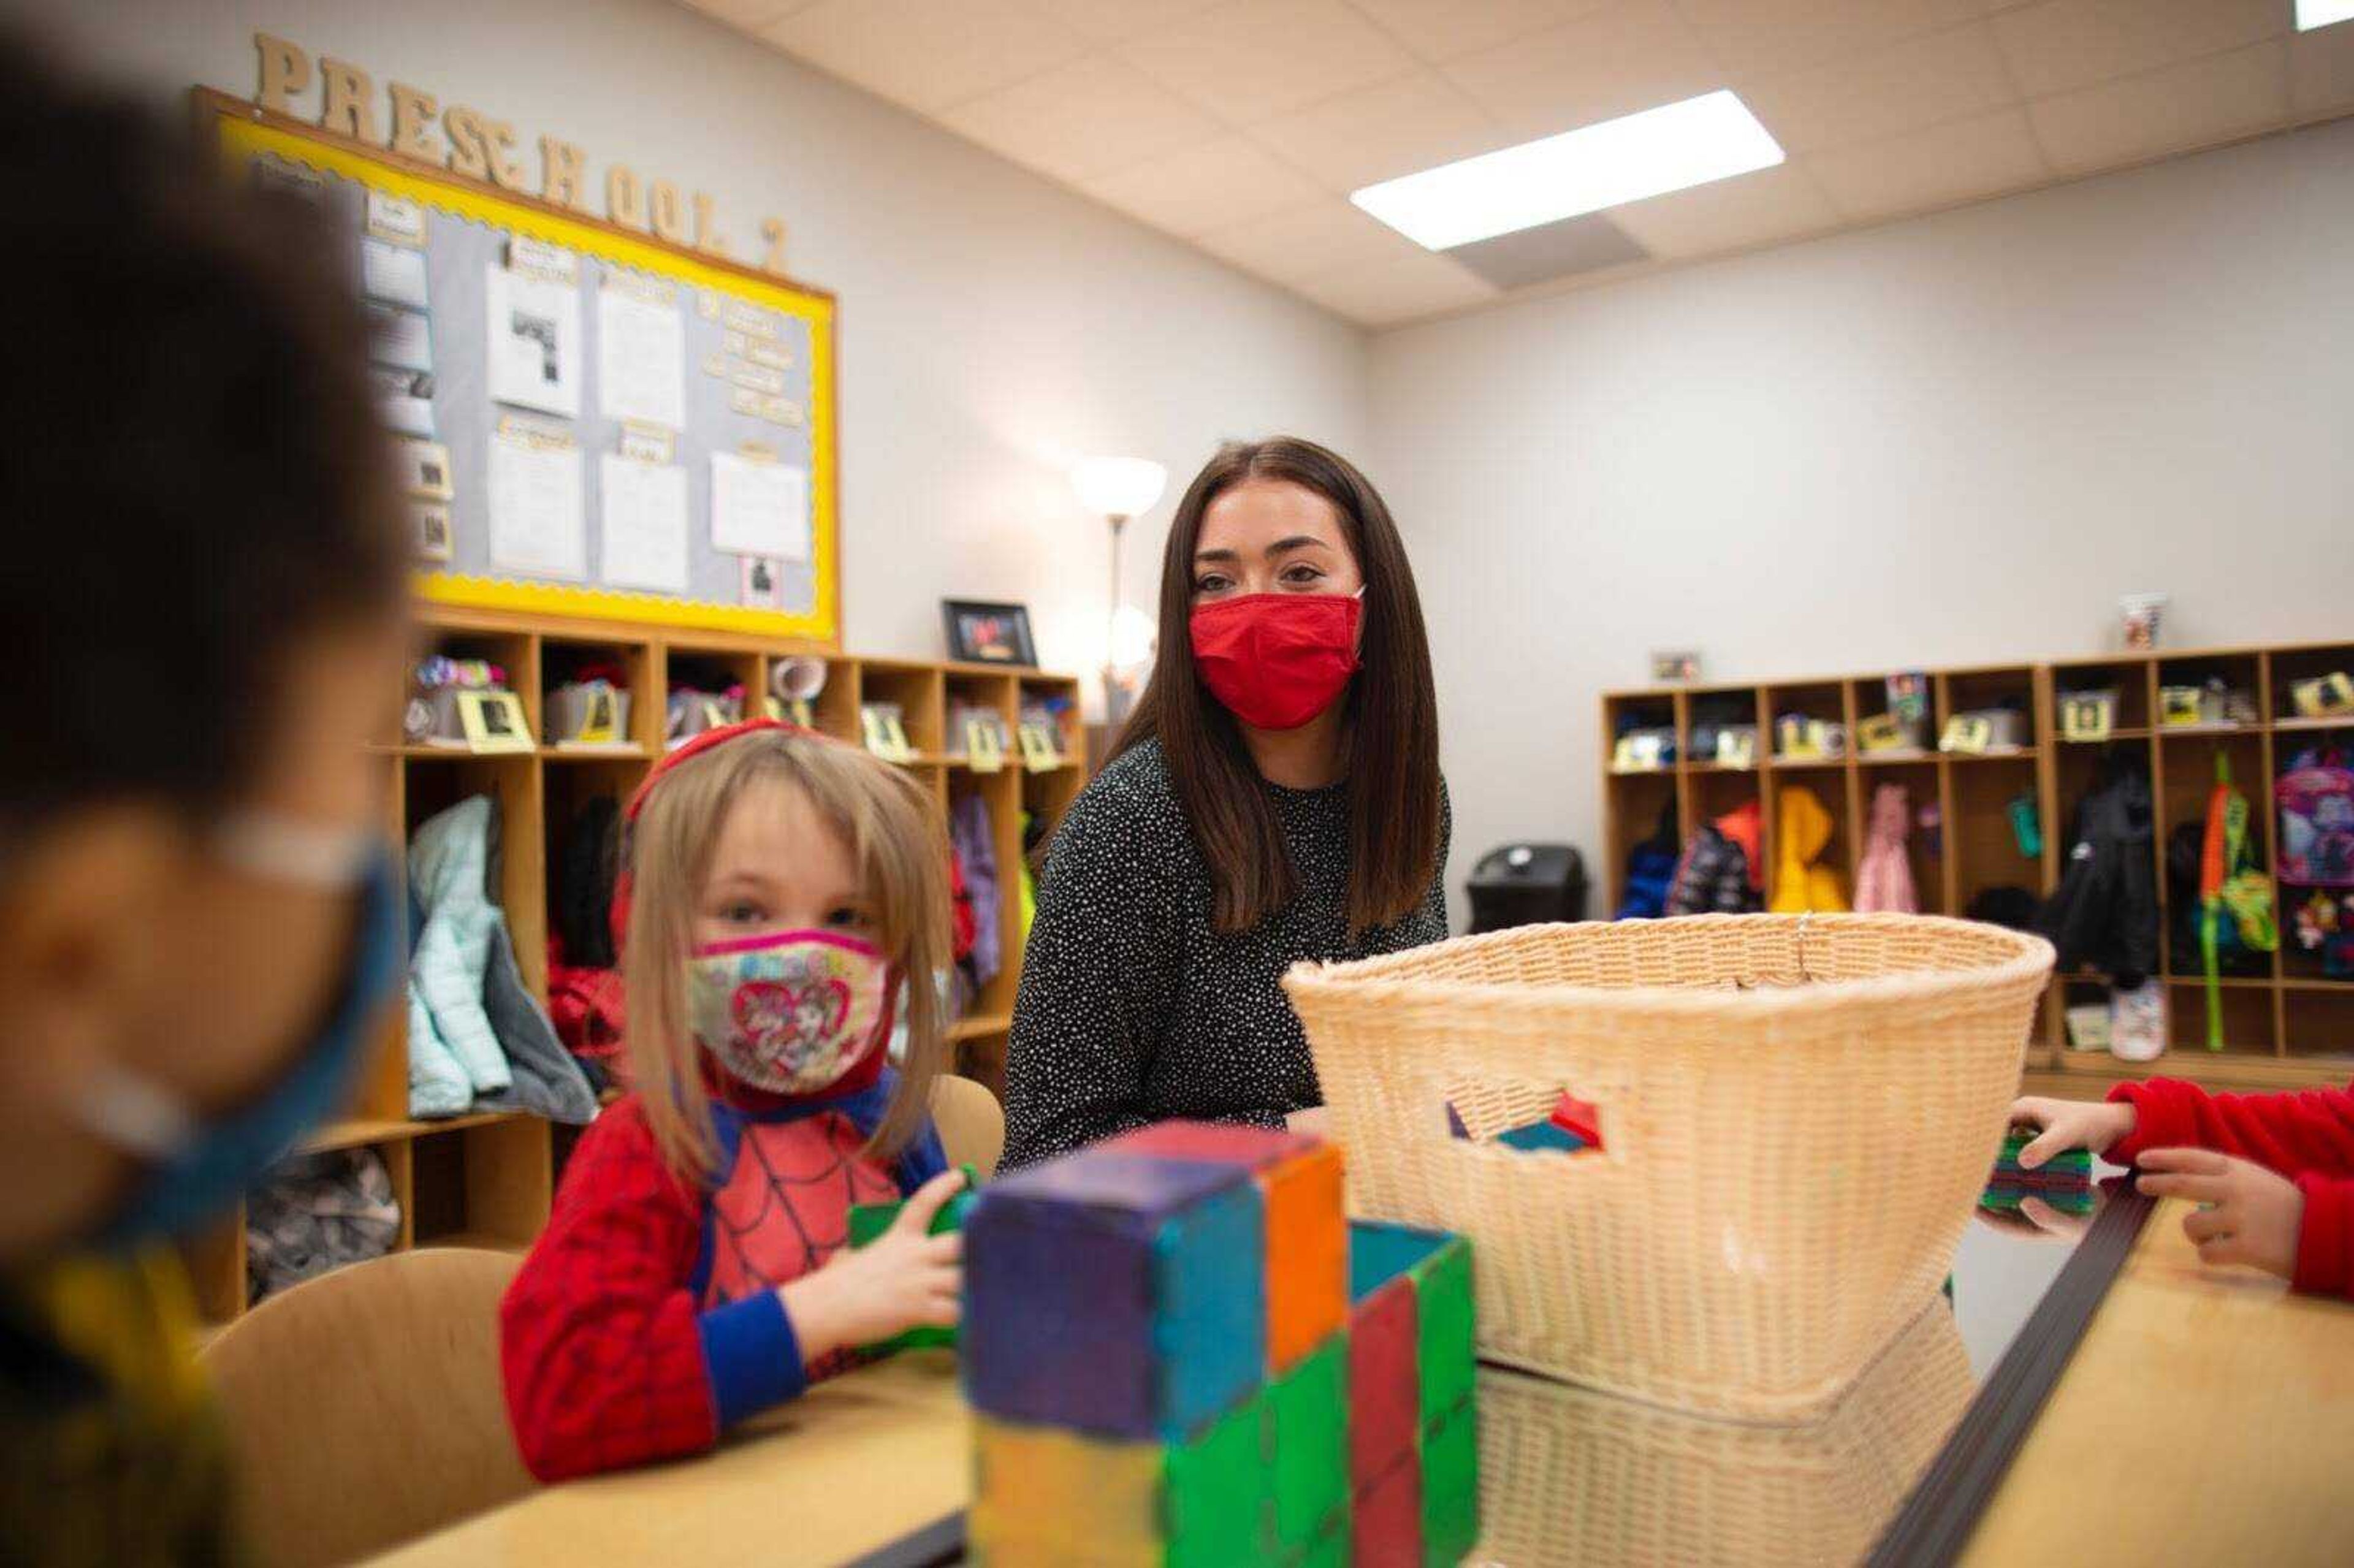 University students and preschoolers play with blocks at the University School for Young Children.